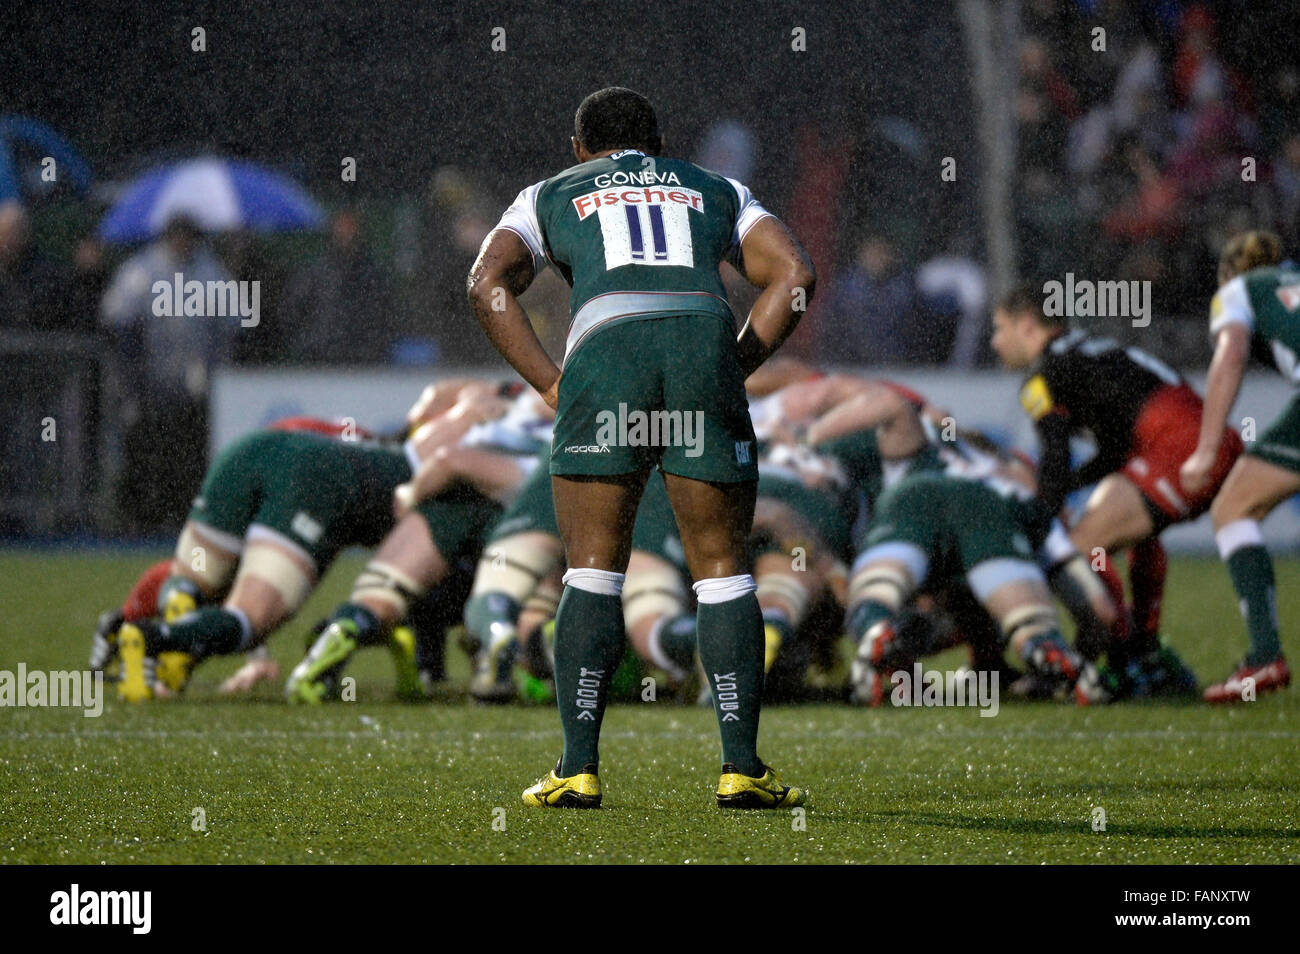 London, UK. 2nd January, 2016. Aviva Premiership Rugby Saracens v Leicester Tigers at The Allianz Park Stadium London UK action during the match which was won by Saracens 26-6 Credit:  Leo Mason sports photos/Alamy Live News Stock Photo